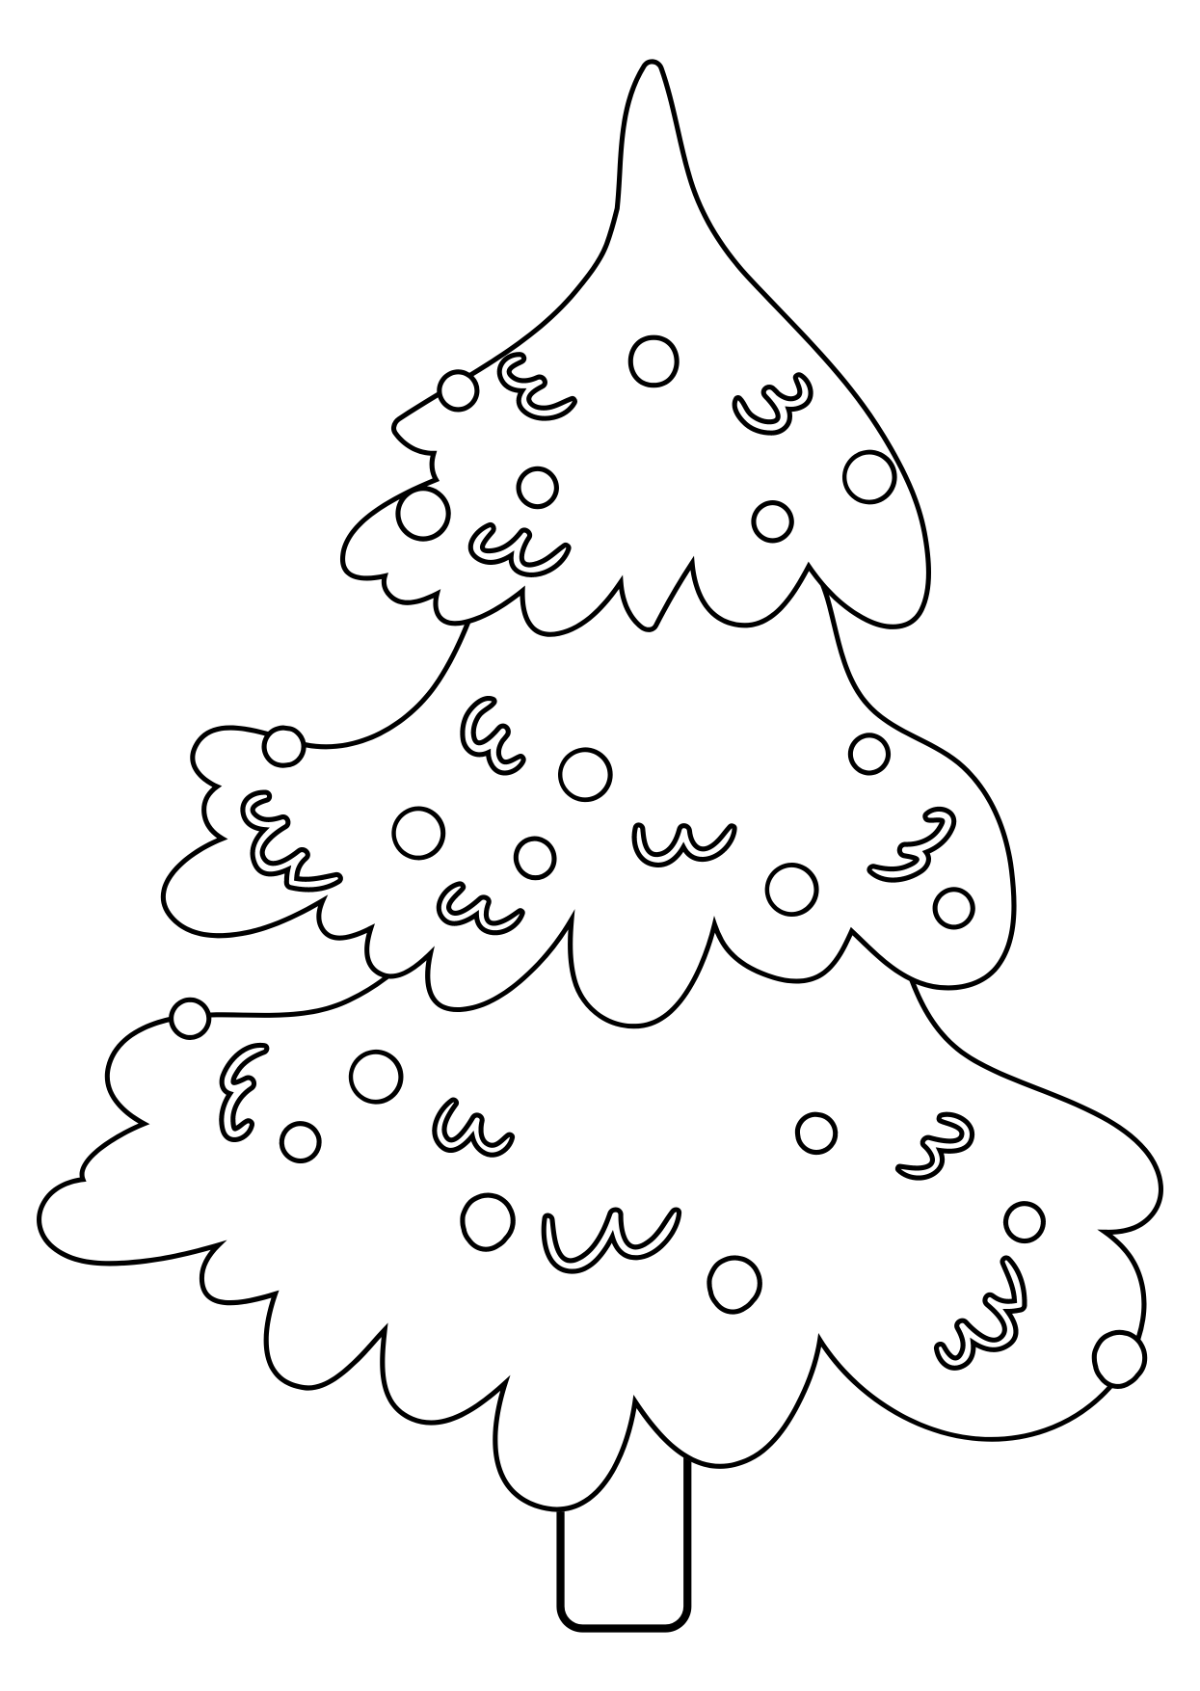 How to draw a Christmas tree || Easy christmas drawing - YouTube